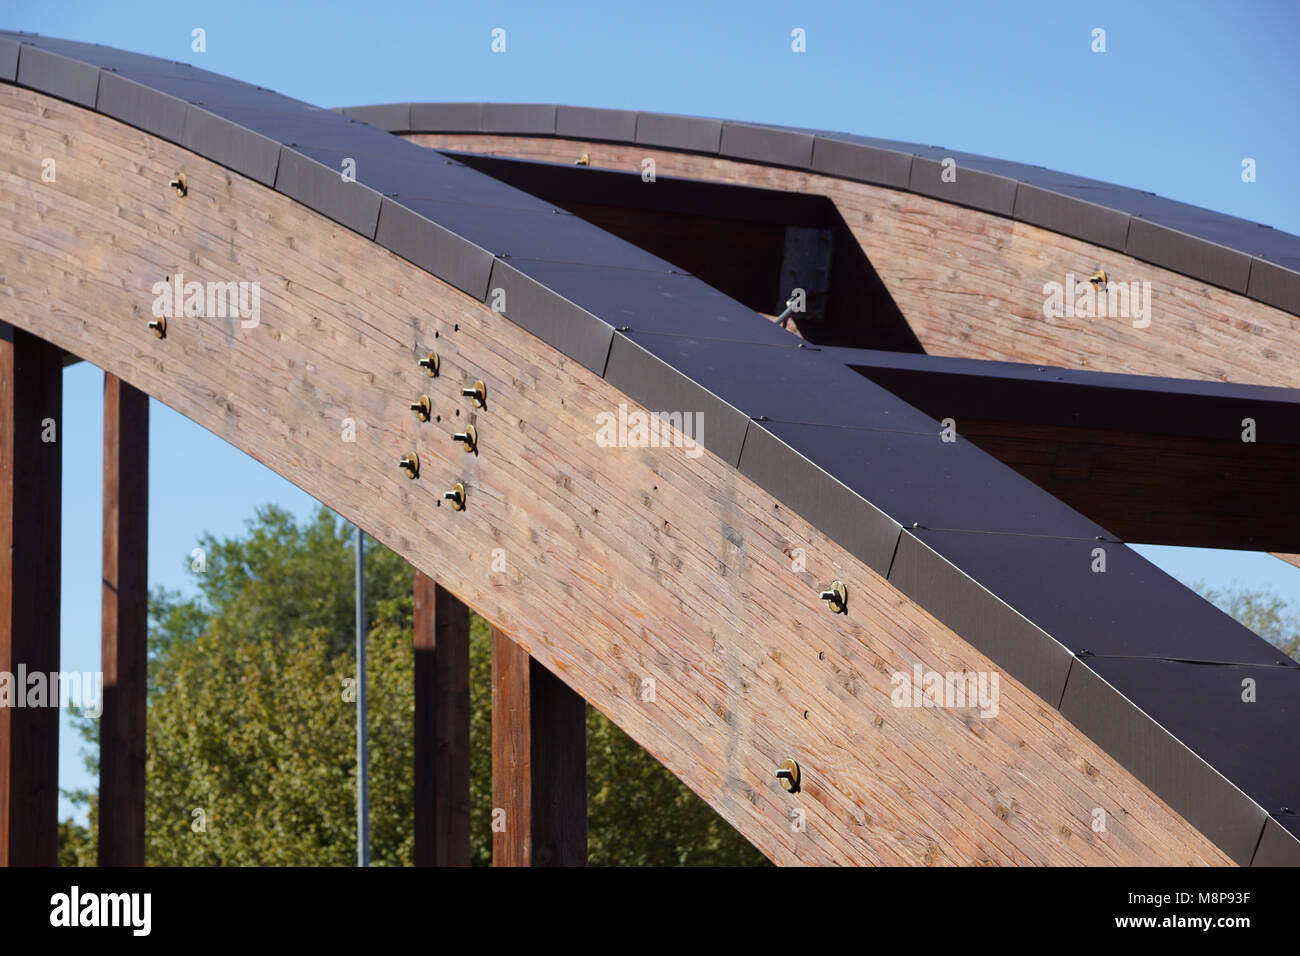 detail of a wooden arch on a bridge Stock Photo